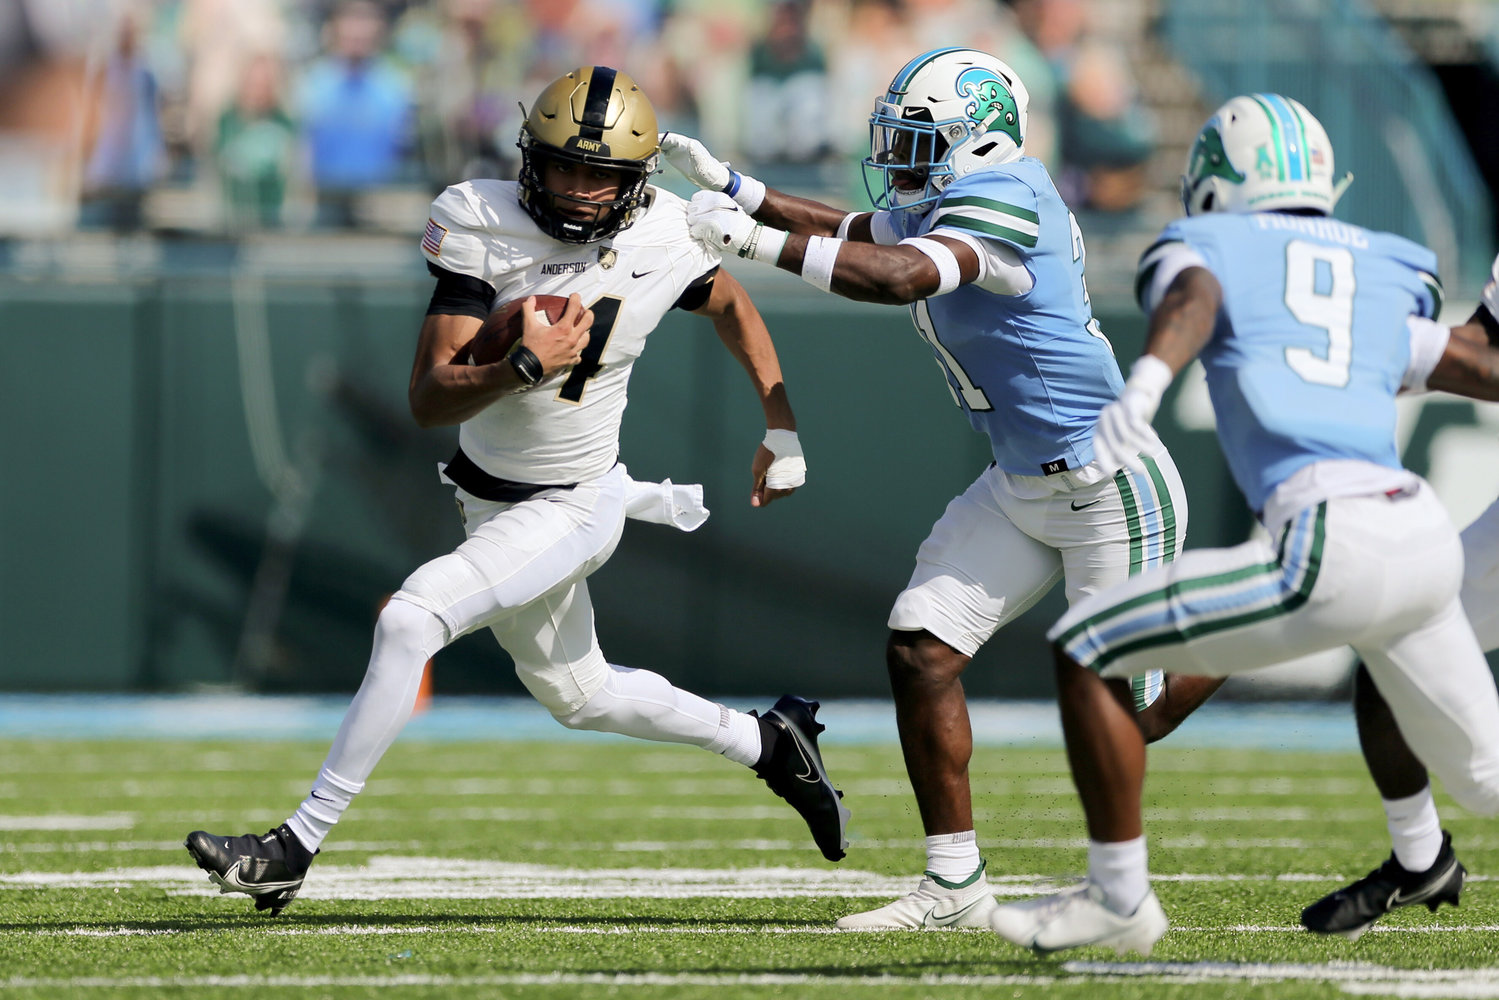 Army quarterback Christian Anderson tries to break loose from defenders in a November college football game against Tulane. Anderson helped West Point to a 9-3 record, culminating in a 24-21 loss against West Virginia in the AutoZone Liberty Bowl.